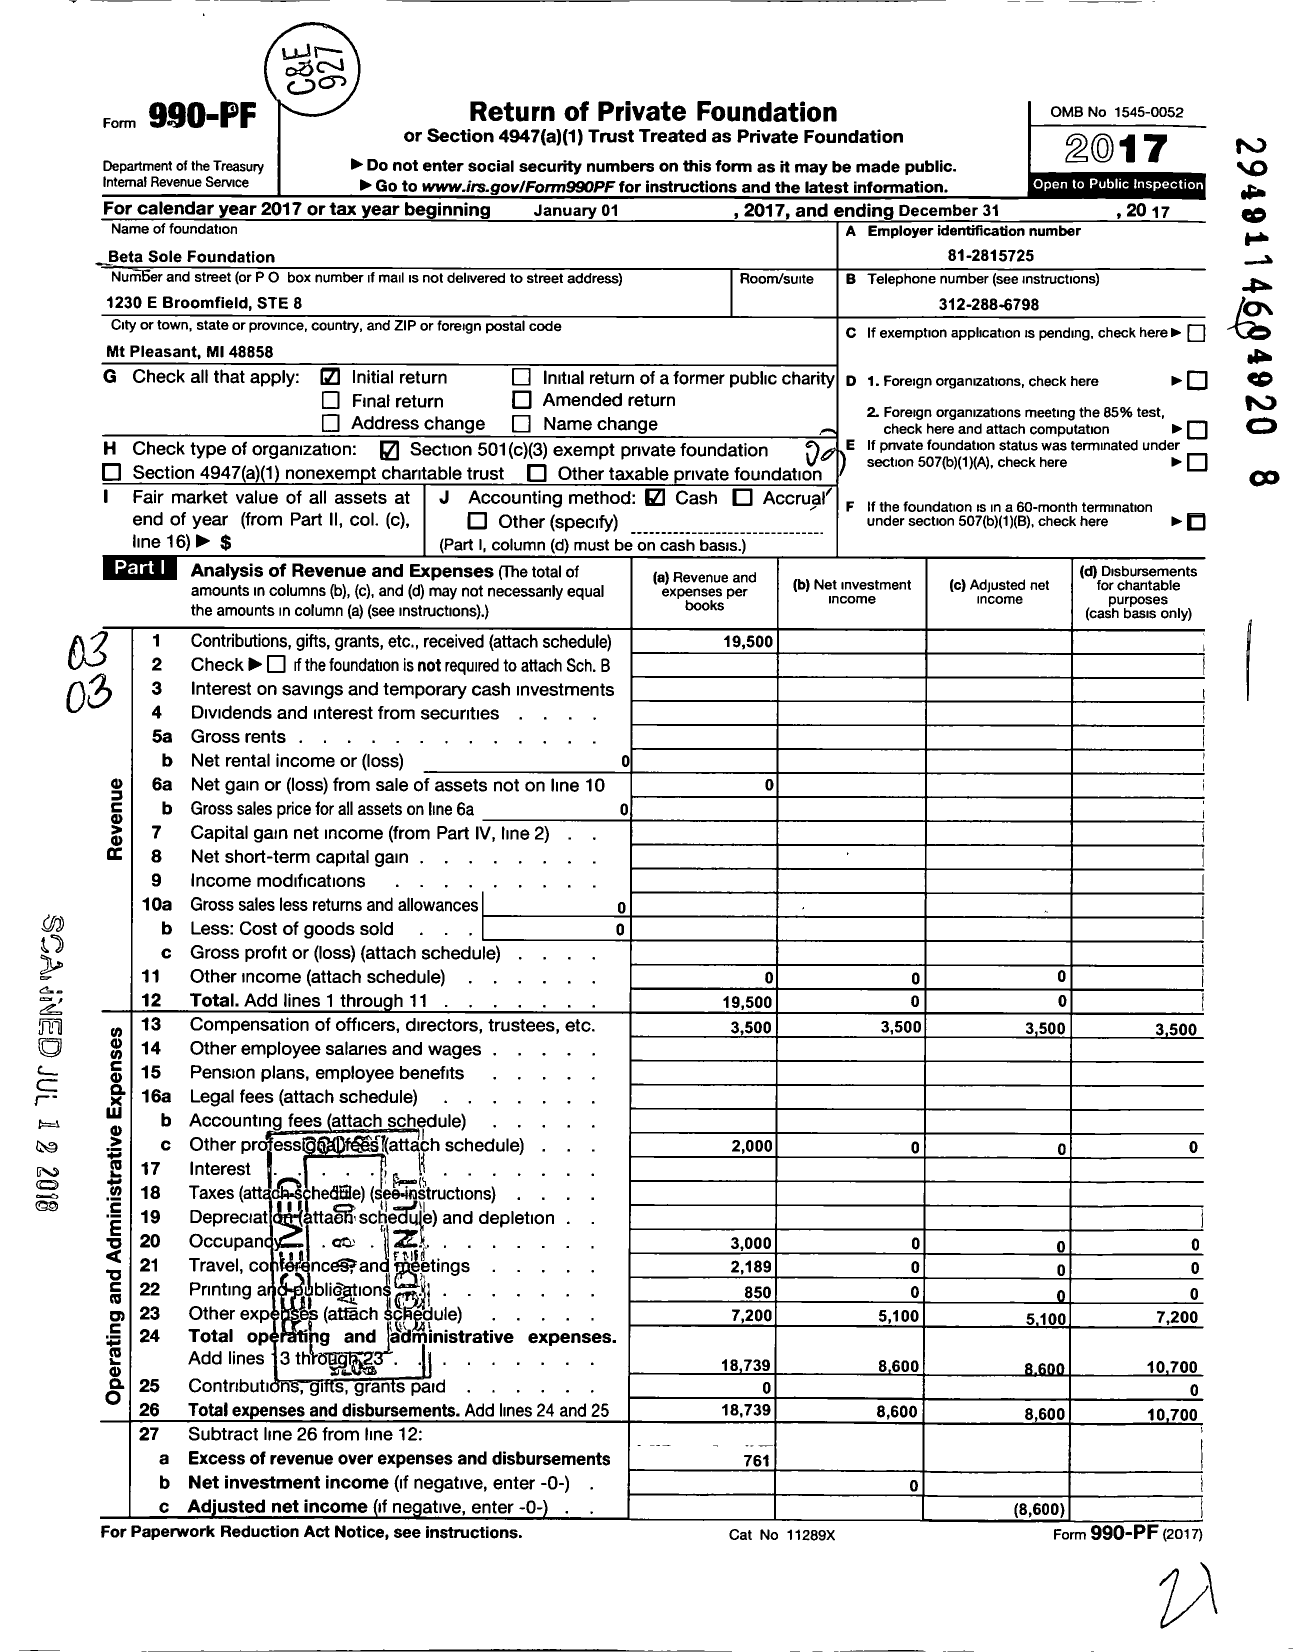 Image of first page of 2017 Form 990PF for Beta Sole Foundation